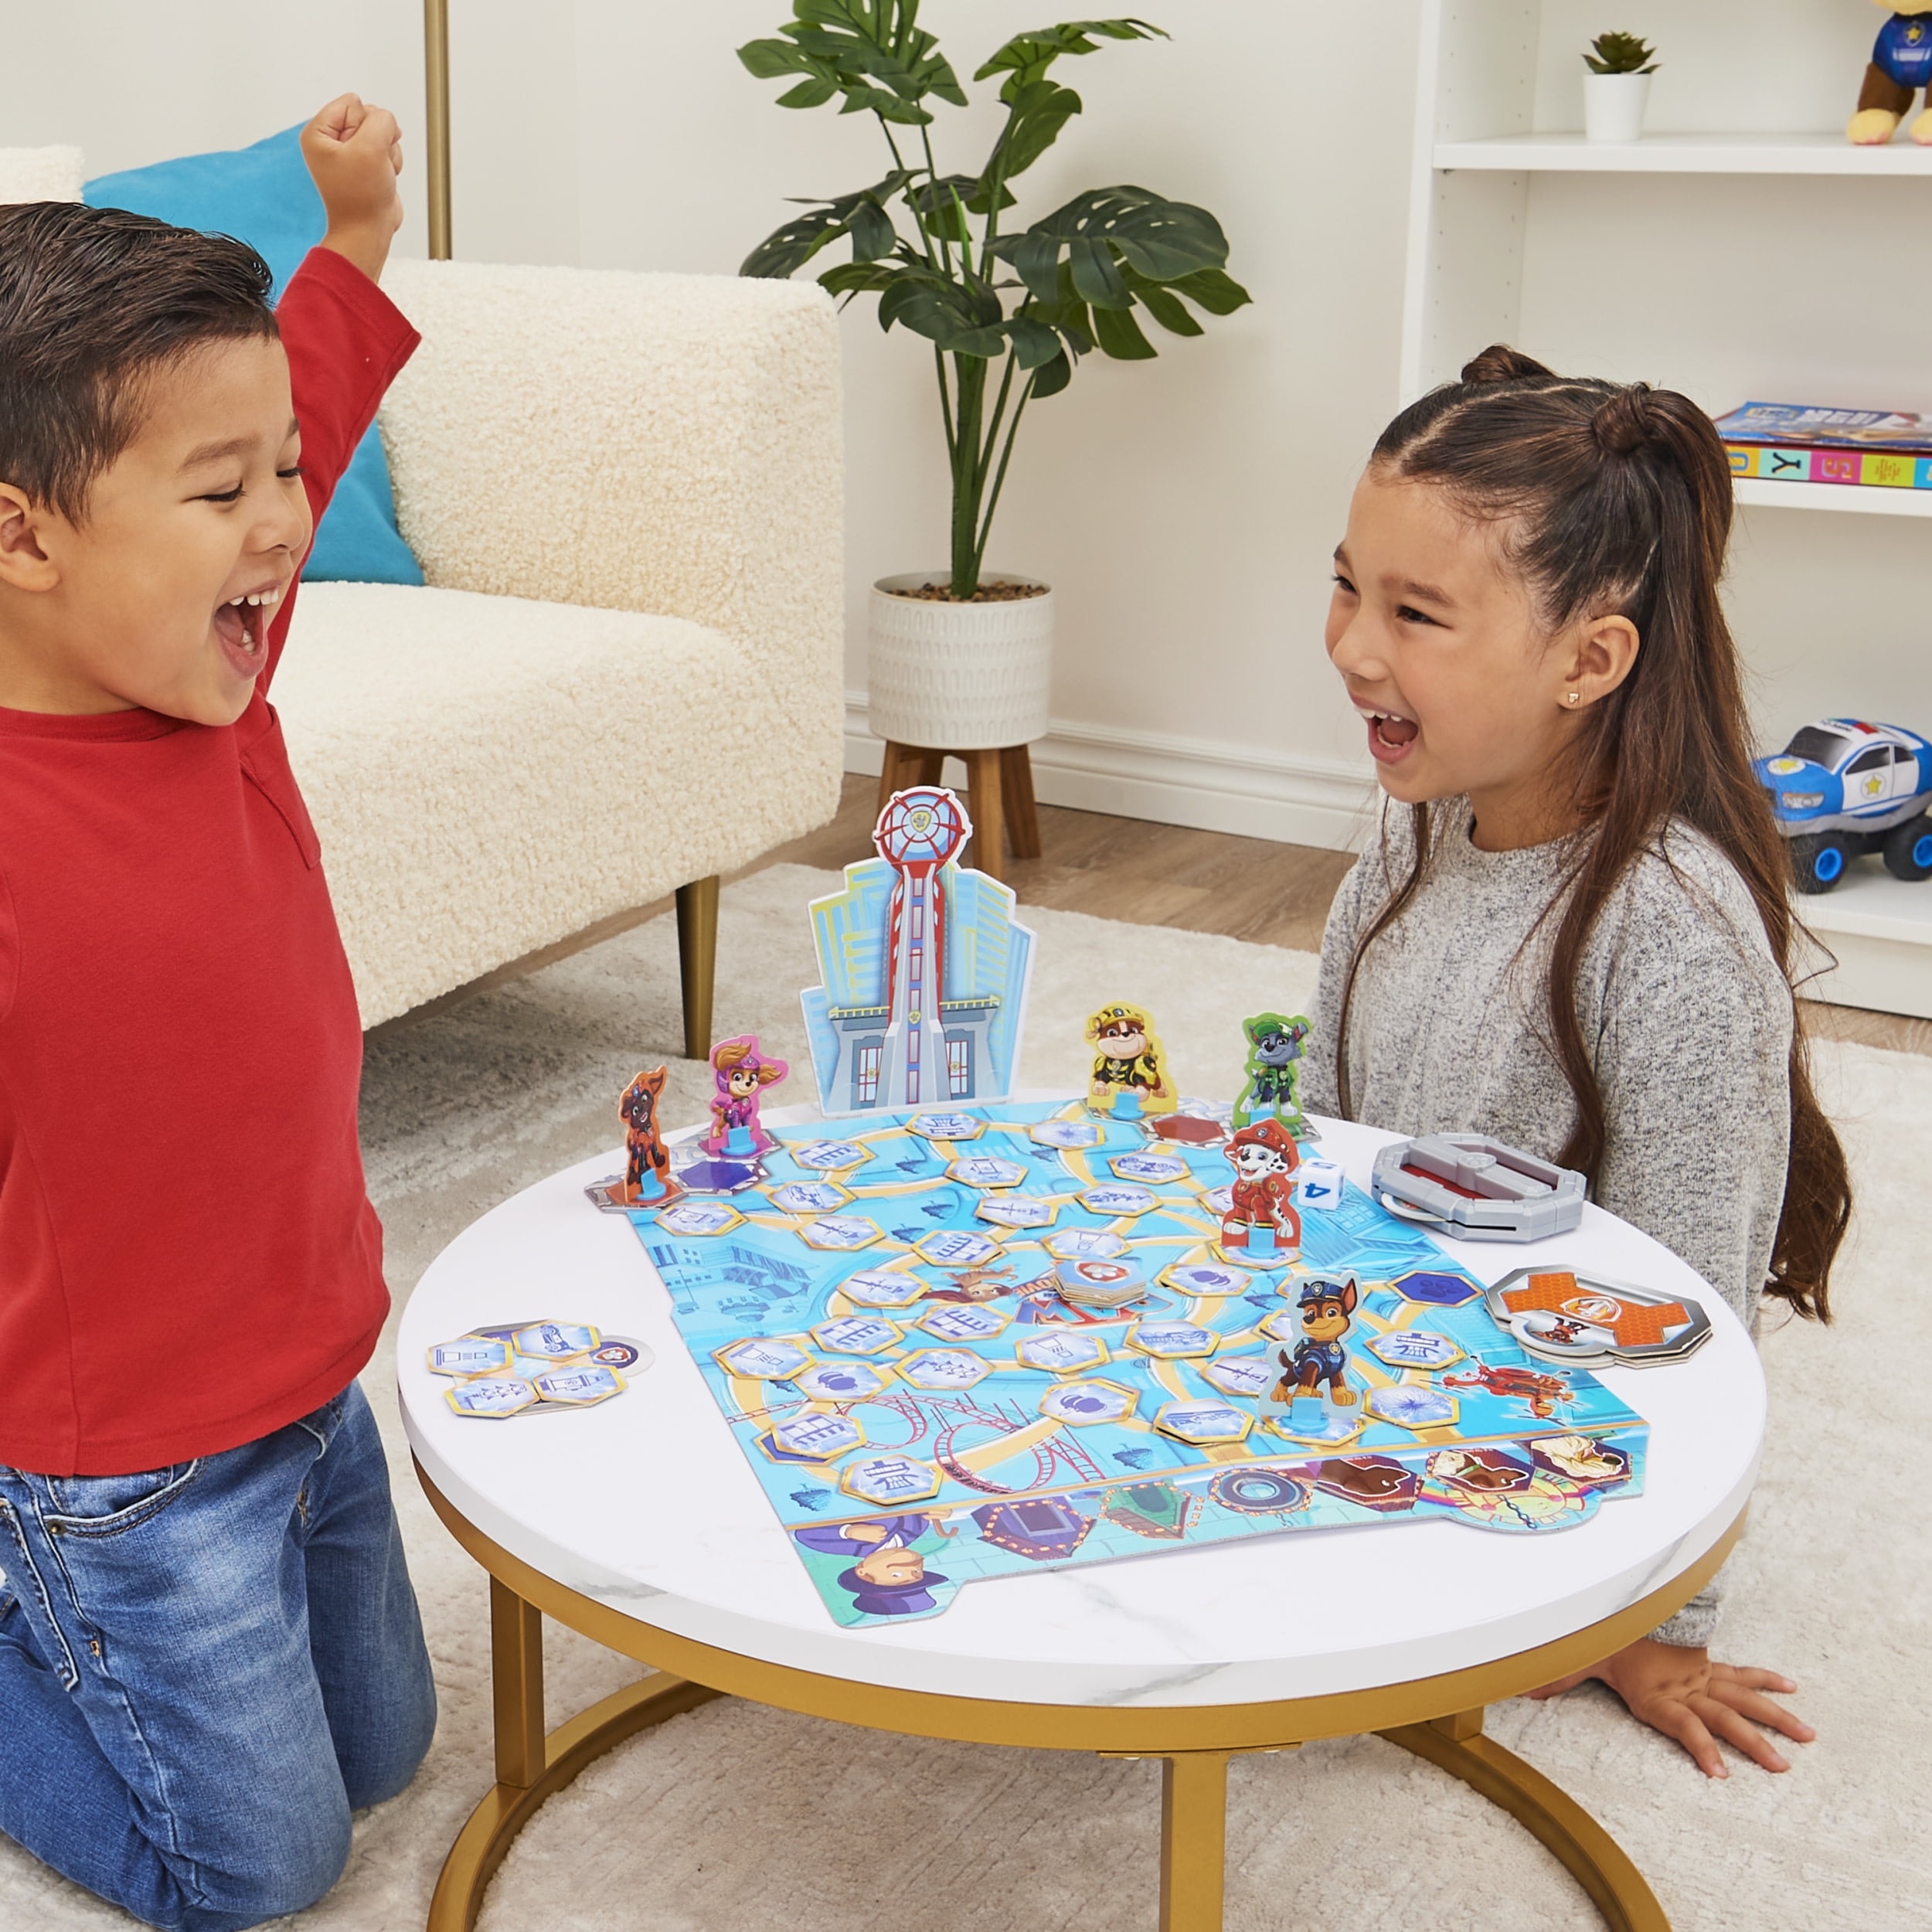 Spin Master Games The Adventure City Lookout Game - The Child's Game for  PAW Patrol: The Movie”, 6062265